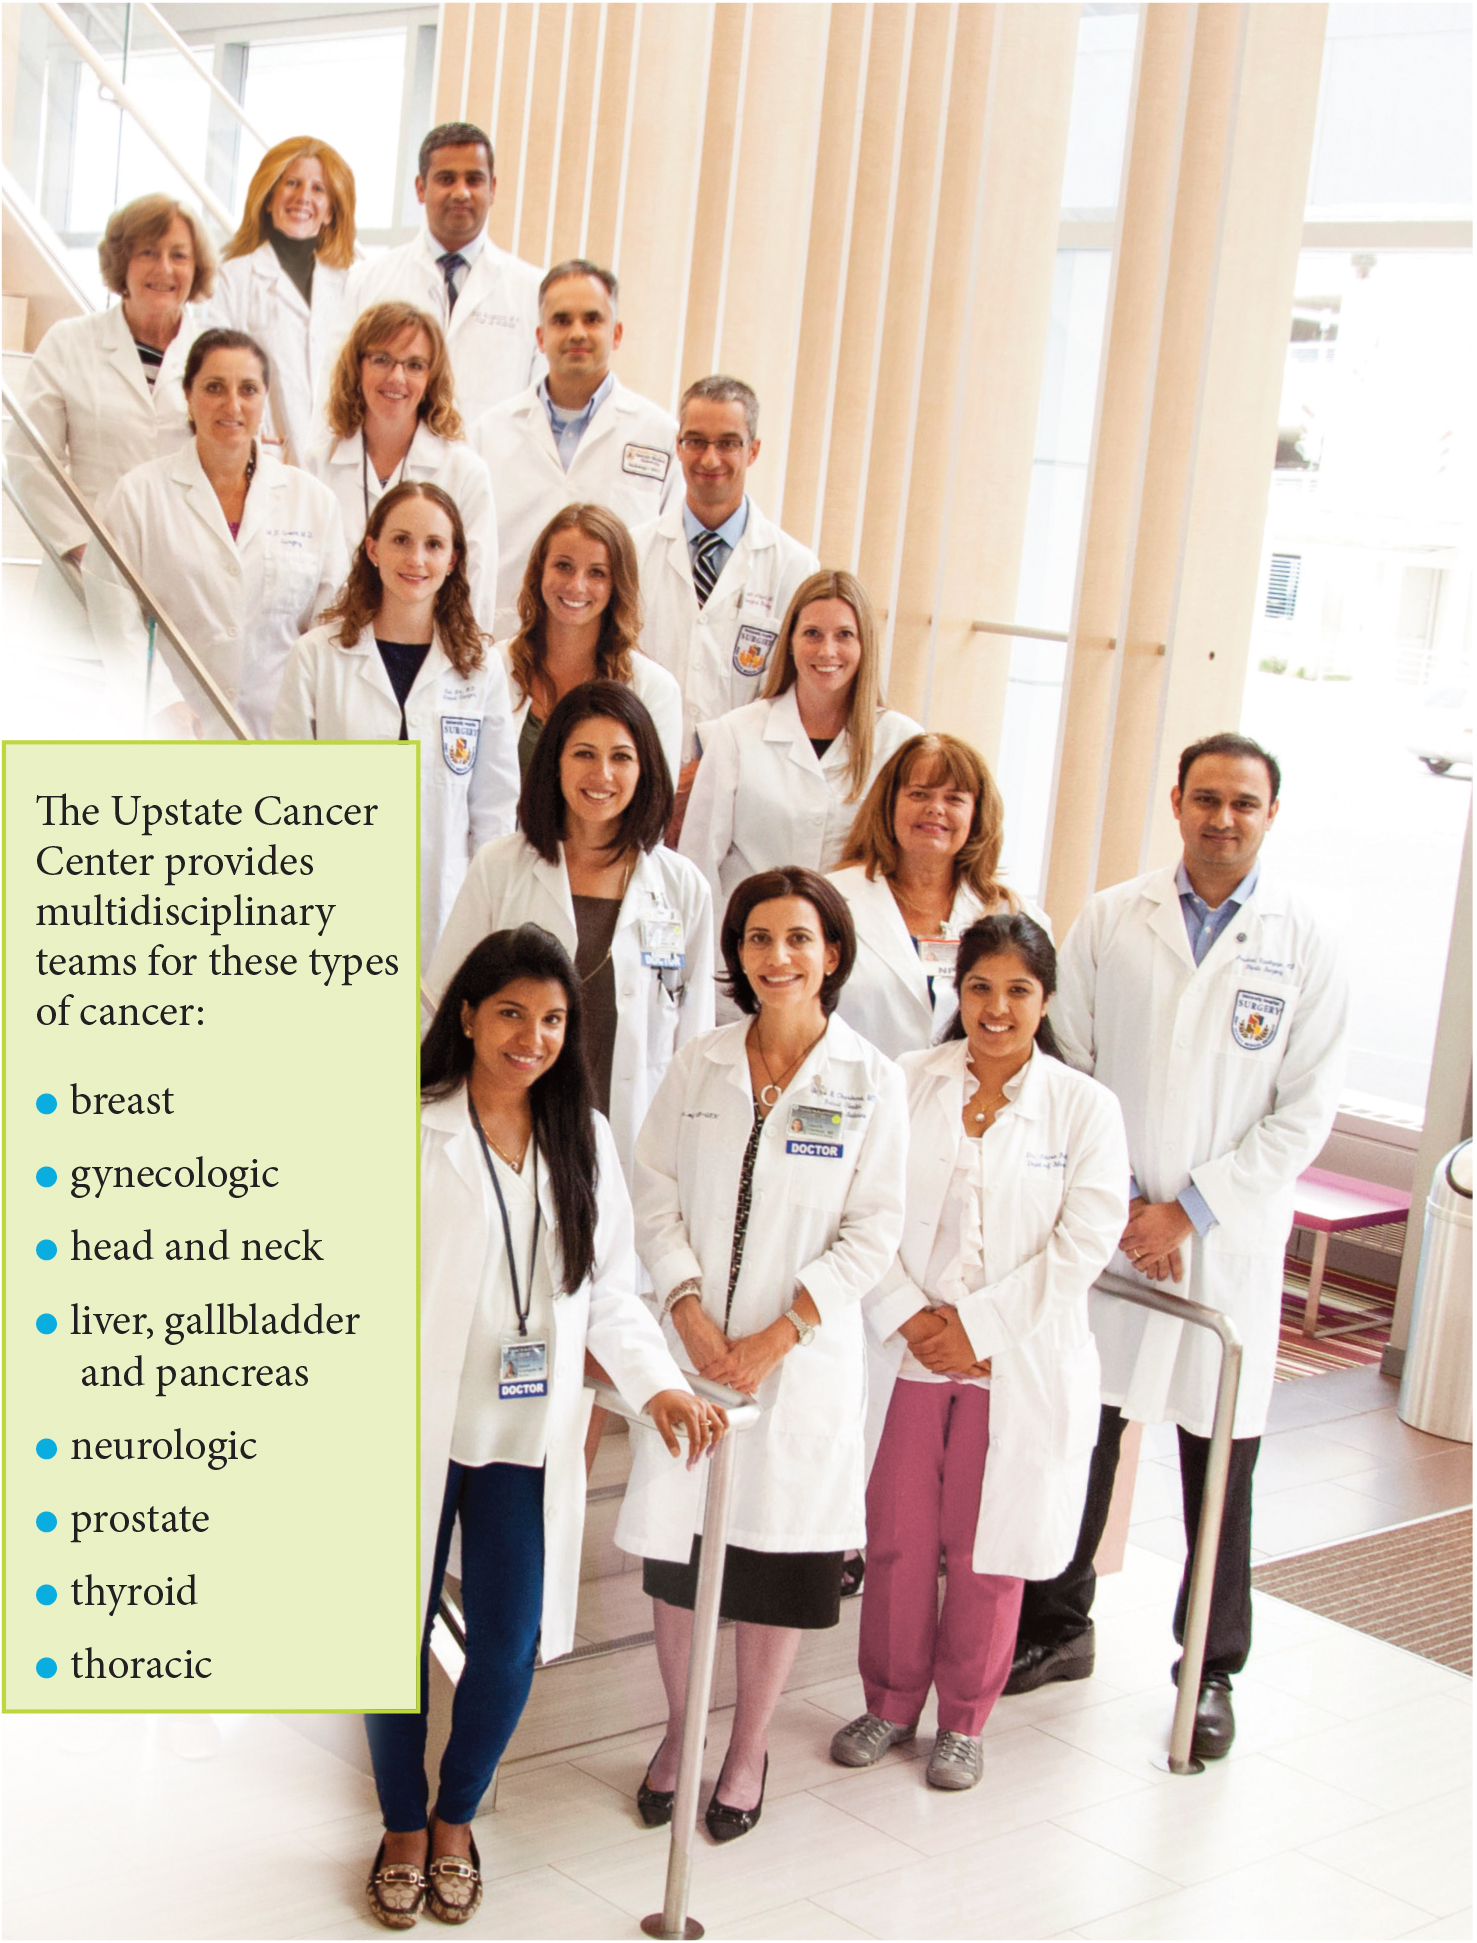 The multidisciplinary breast cancer team at the Upstate Cancer Center. (PHOTO BY ROBERT MESCAVAGE)